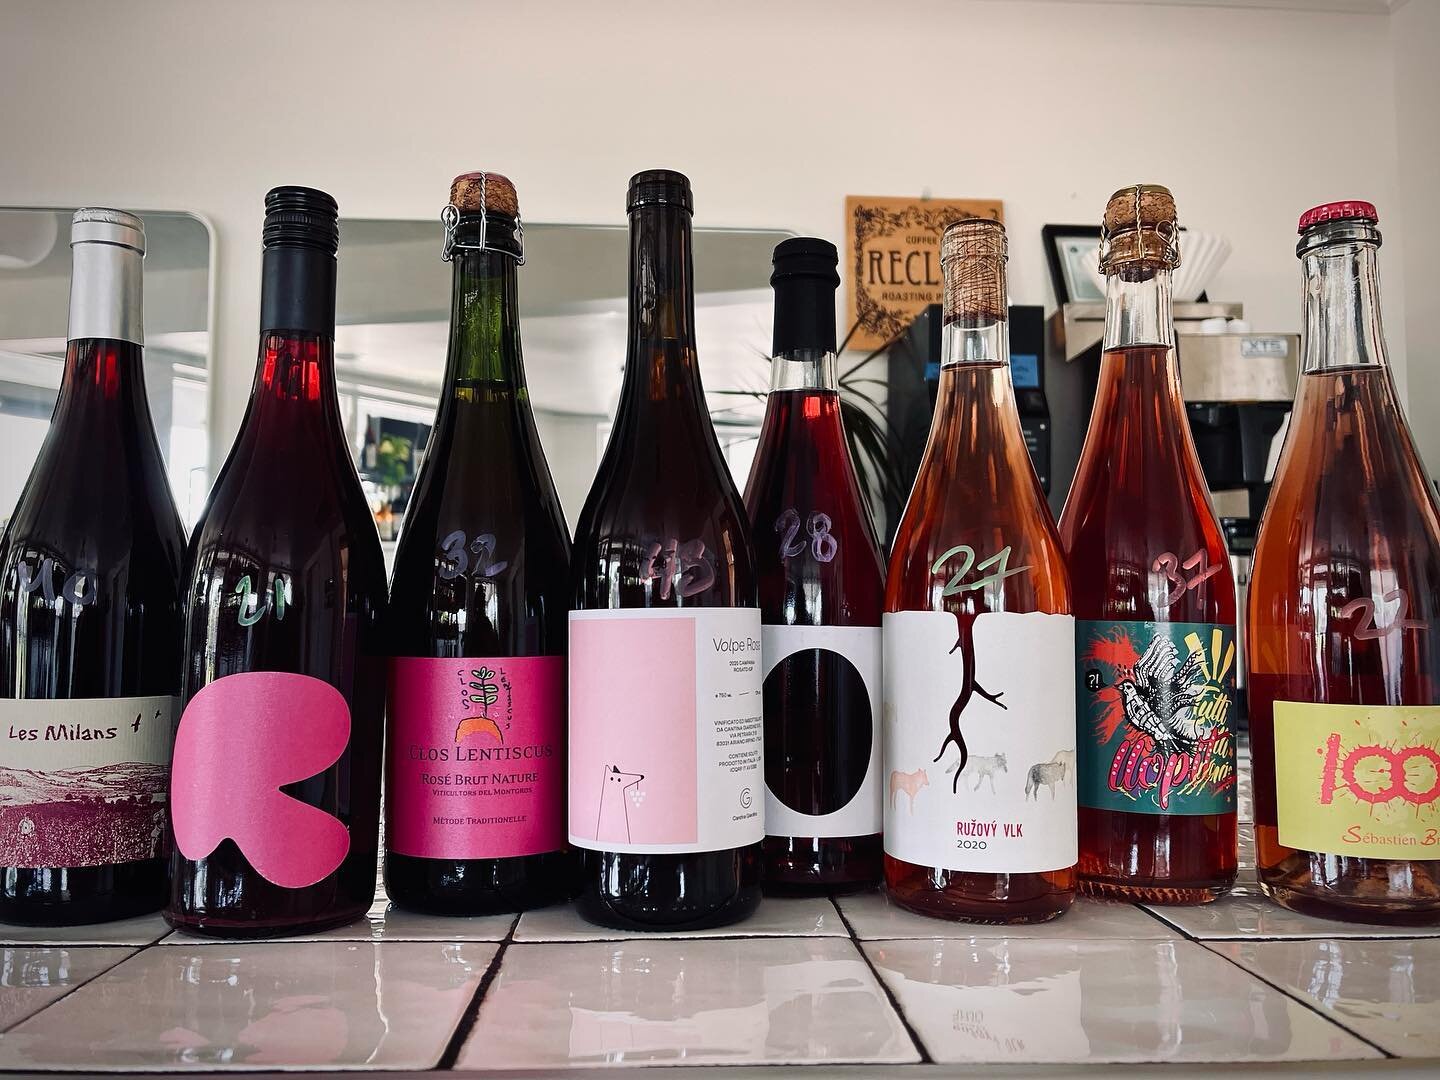 WE LOVE COOL MOMS

these are some of the wines i think of when i think &lsquo;cool mom&rsquo; 

(of course moms of kids, projects, animals etc also drink white wine) 

anyway, NO CORKAGE TODAY 

use the code MOM10 for 10% off bottles of wine online t